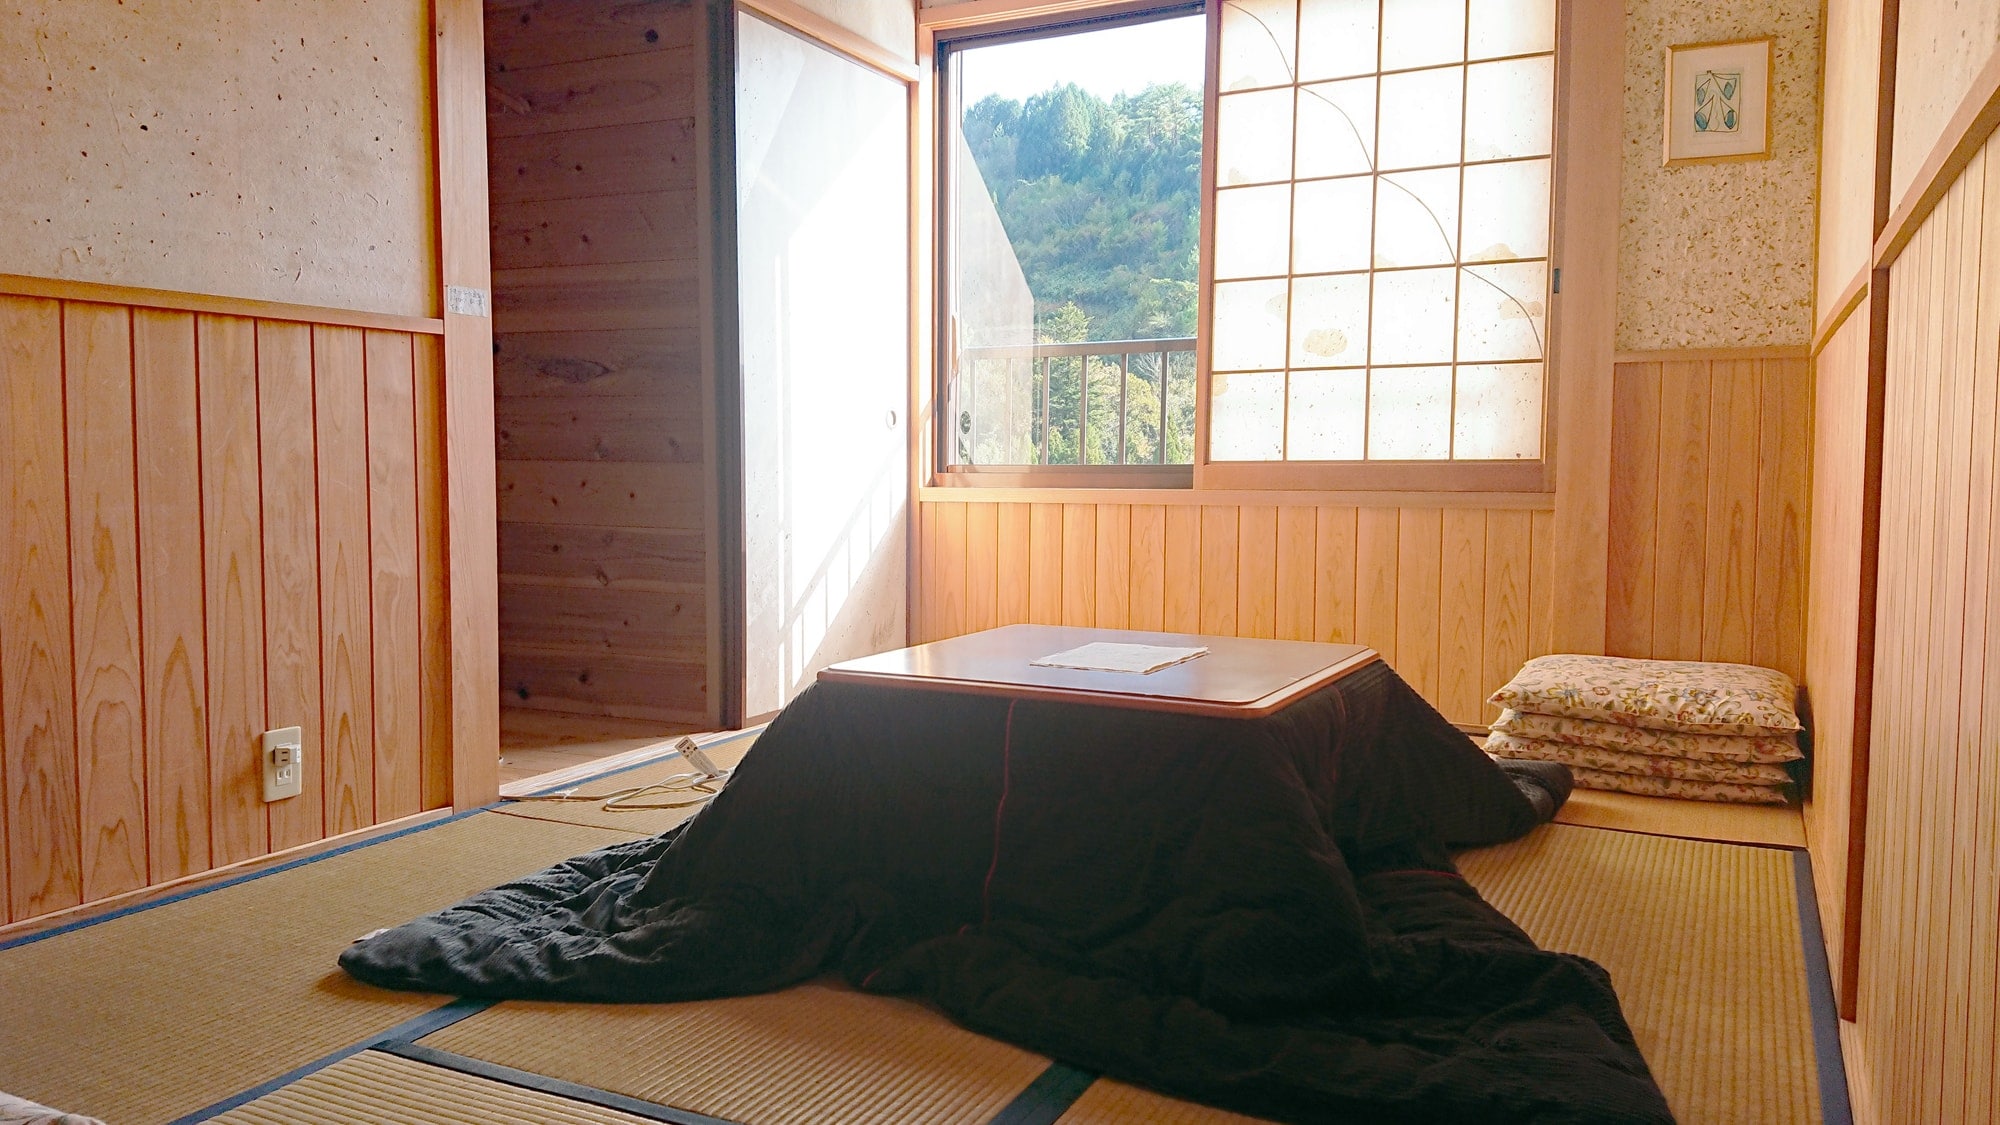 [Guest room] There will be two separate rooms, a 6-tatami Japanese room and an 8-tatami Japanese room.